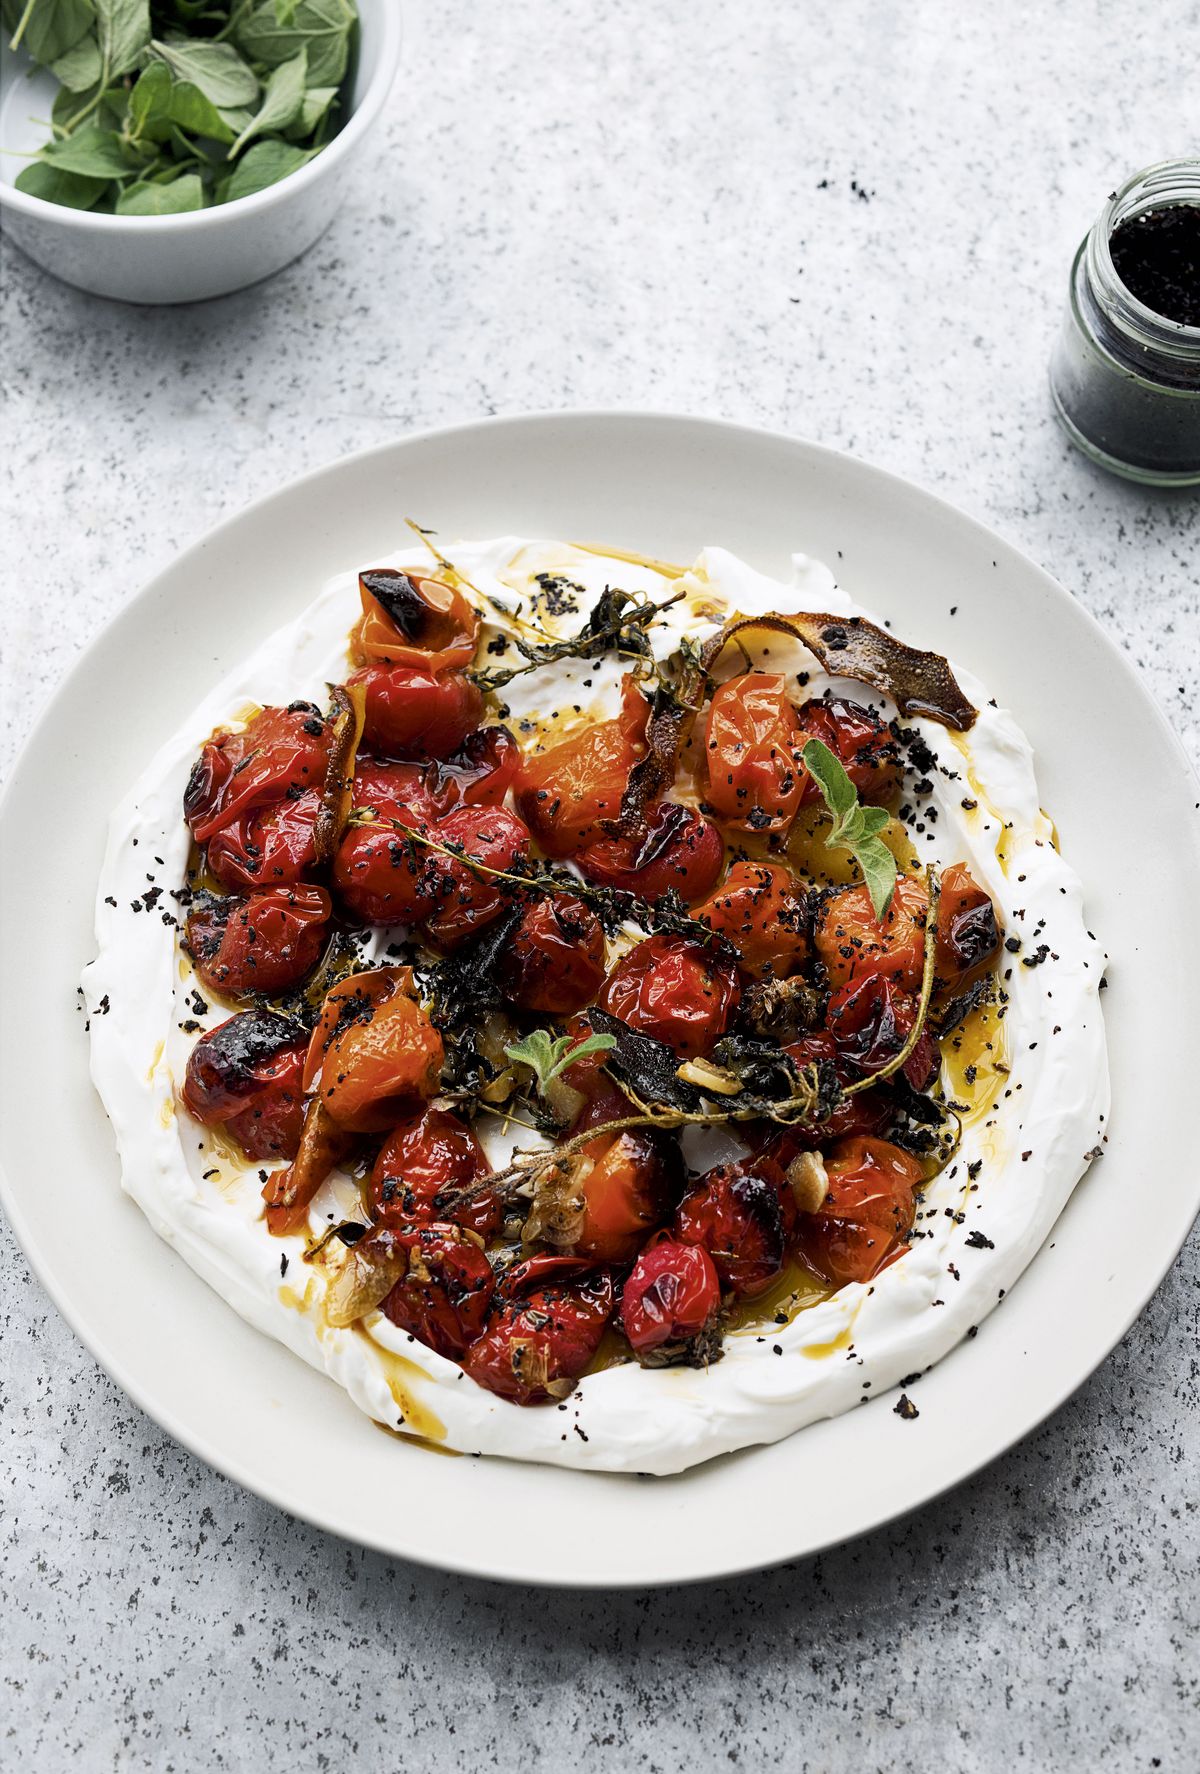 Ottolenghi’s Hot Charred Cherry Tomatoes with Cold Yoghurt